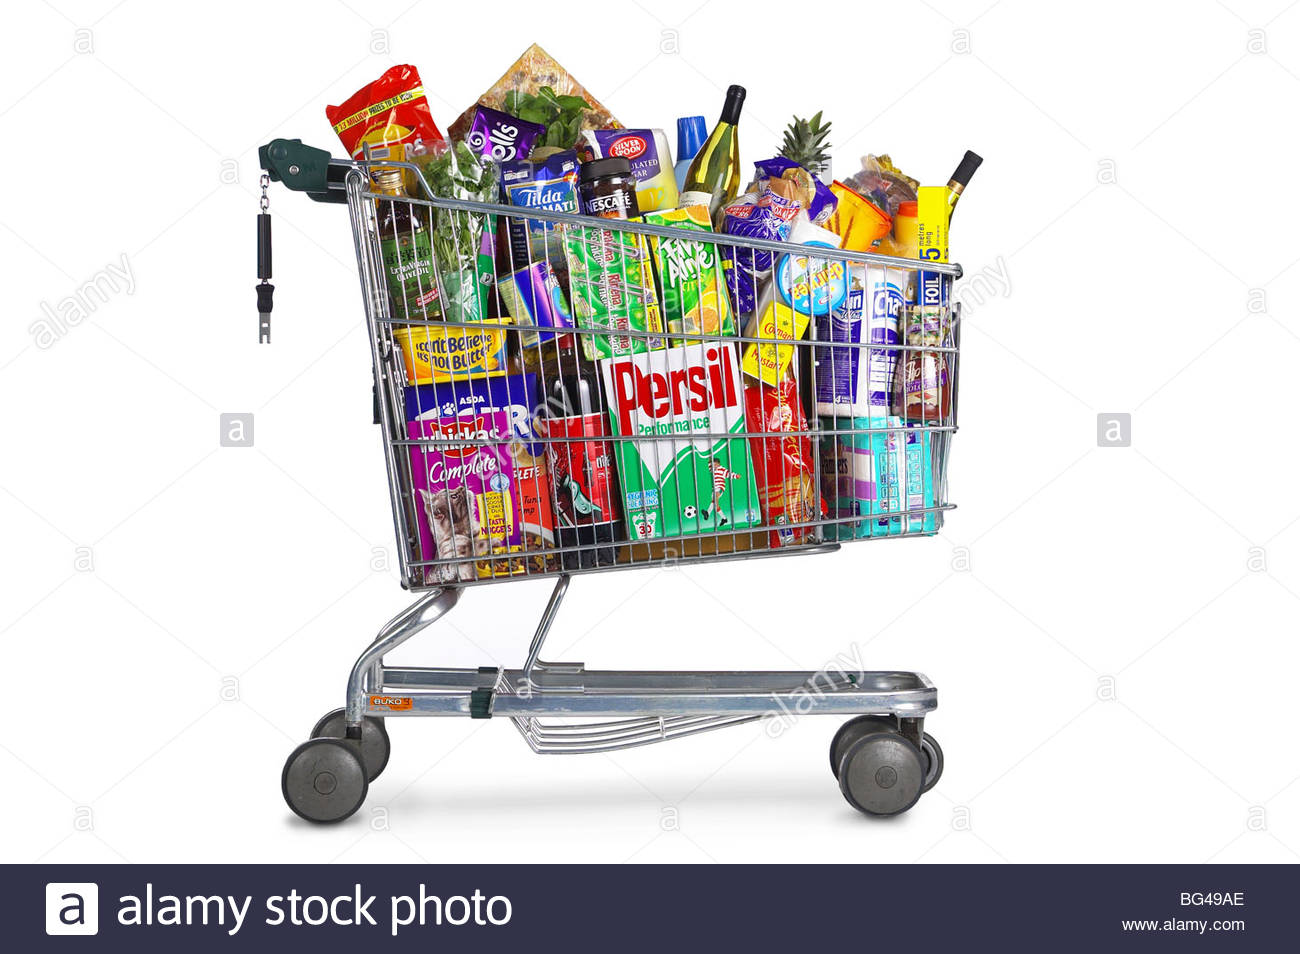 A supermarket trolley full of groceries Stock Photo, Royalty Free Image